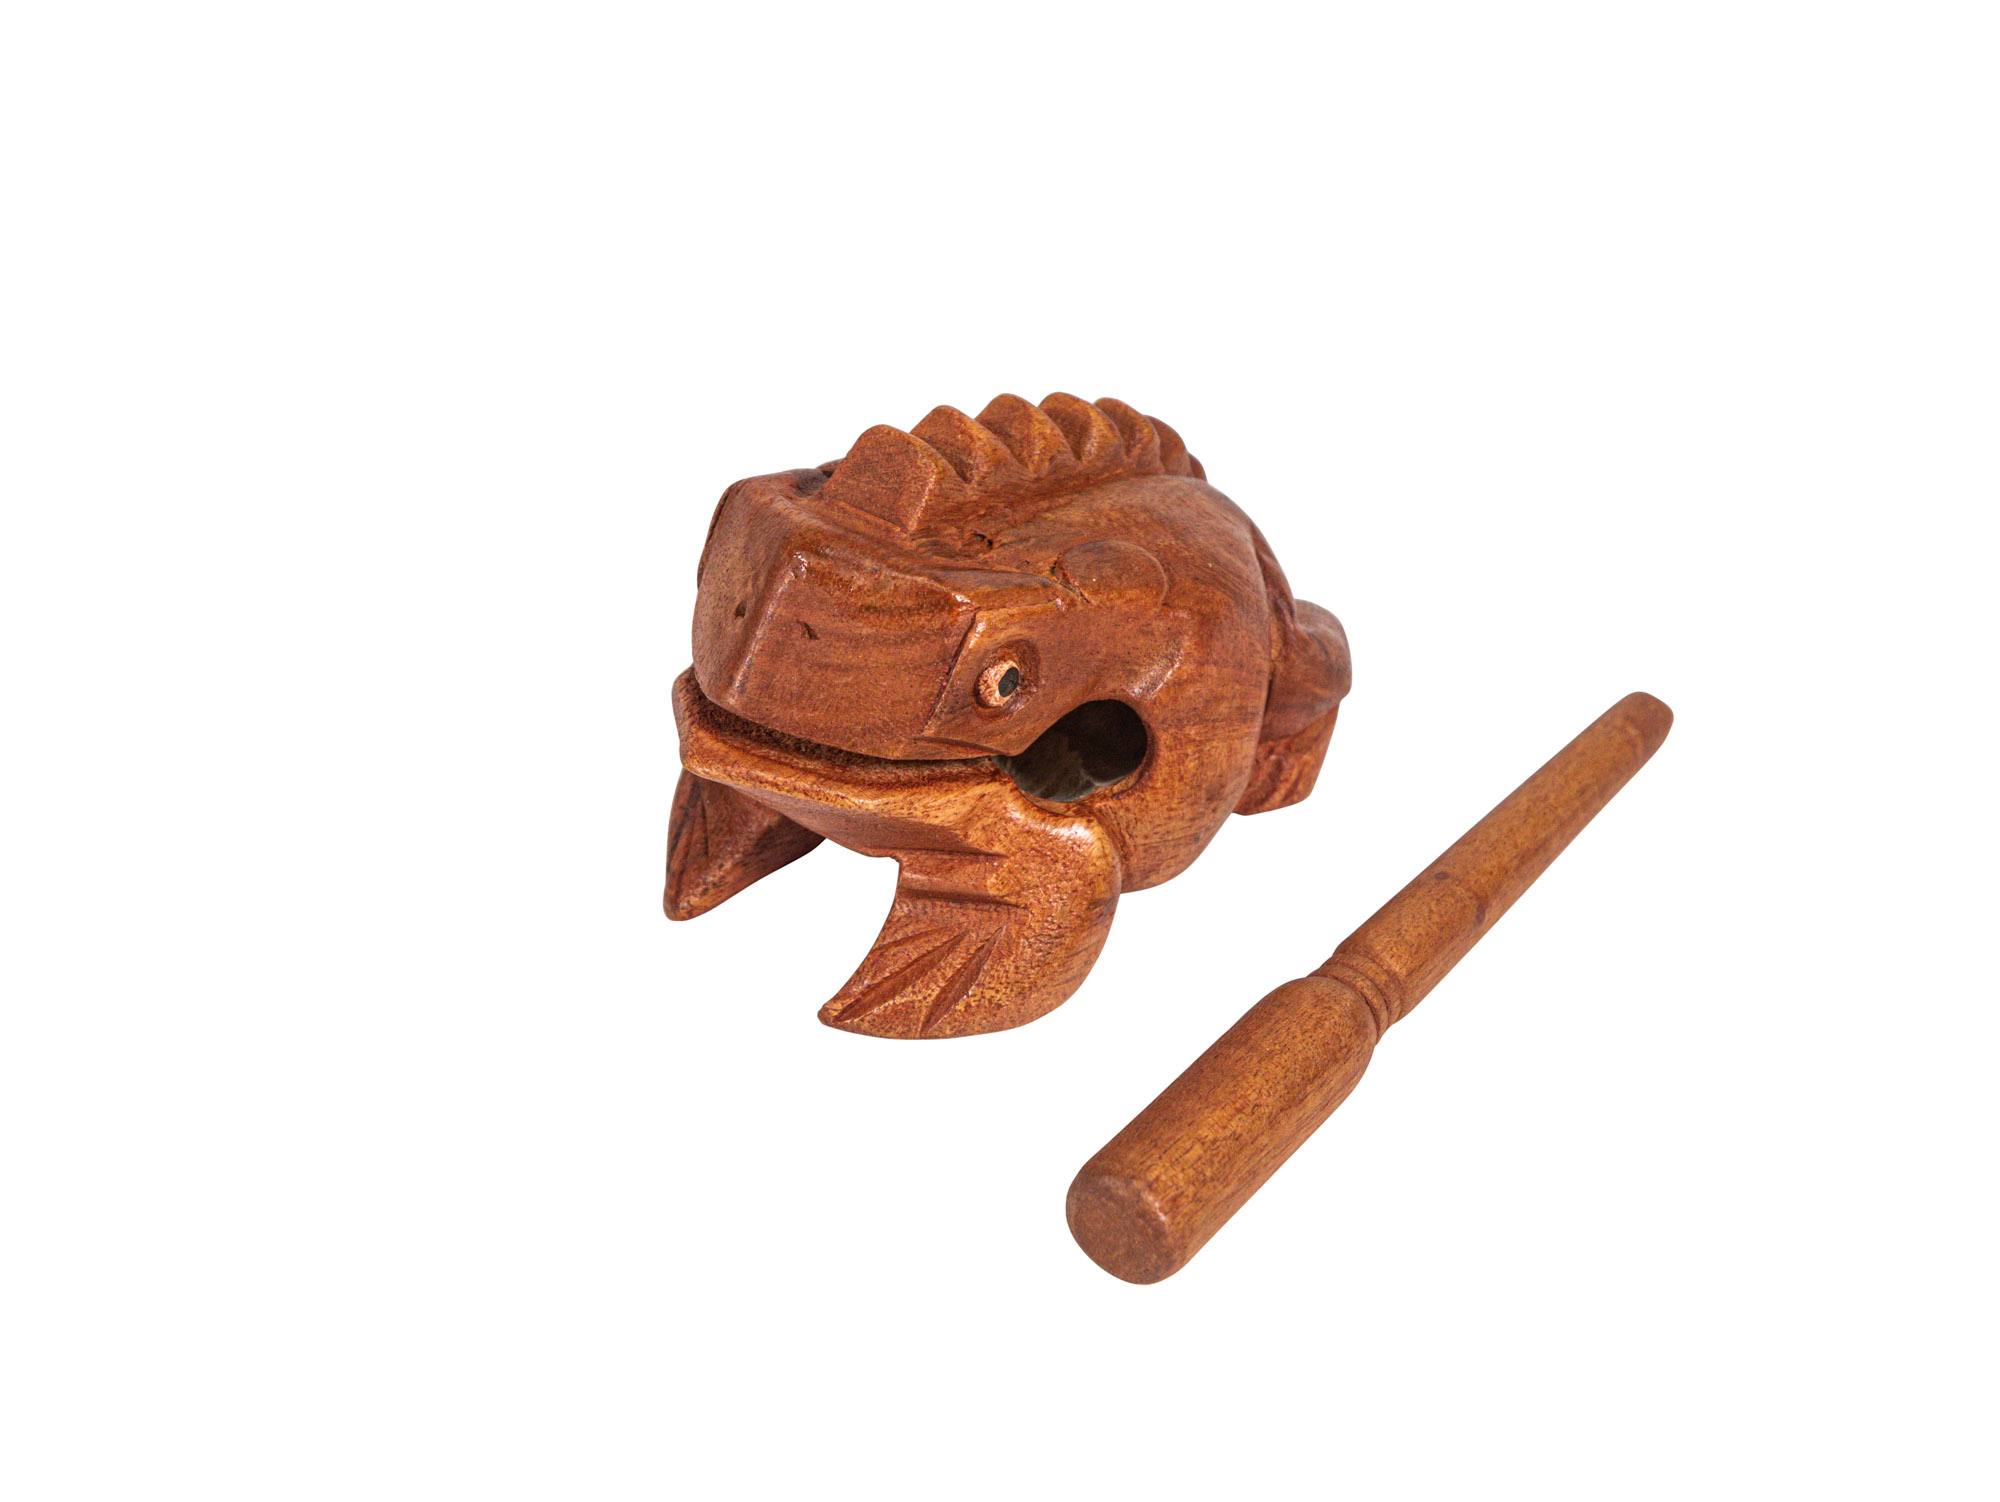 Frog Instrument: 4" to 5" wooden frogs, wooden instrument, musical frogs